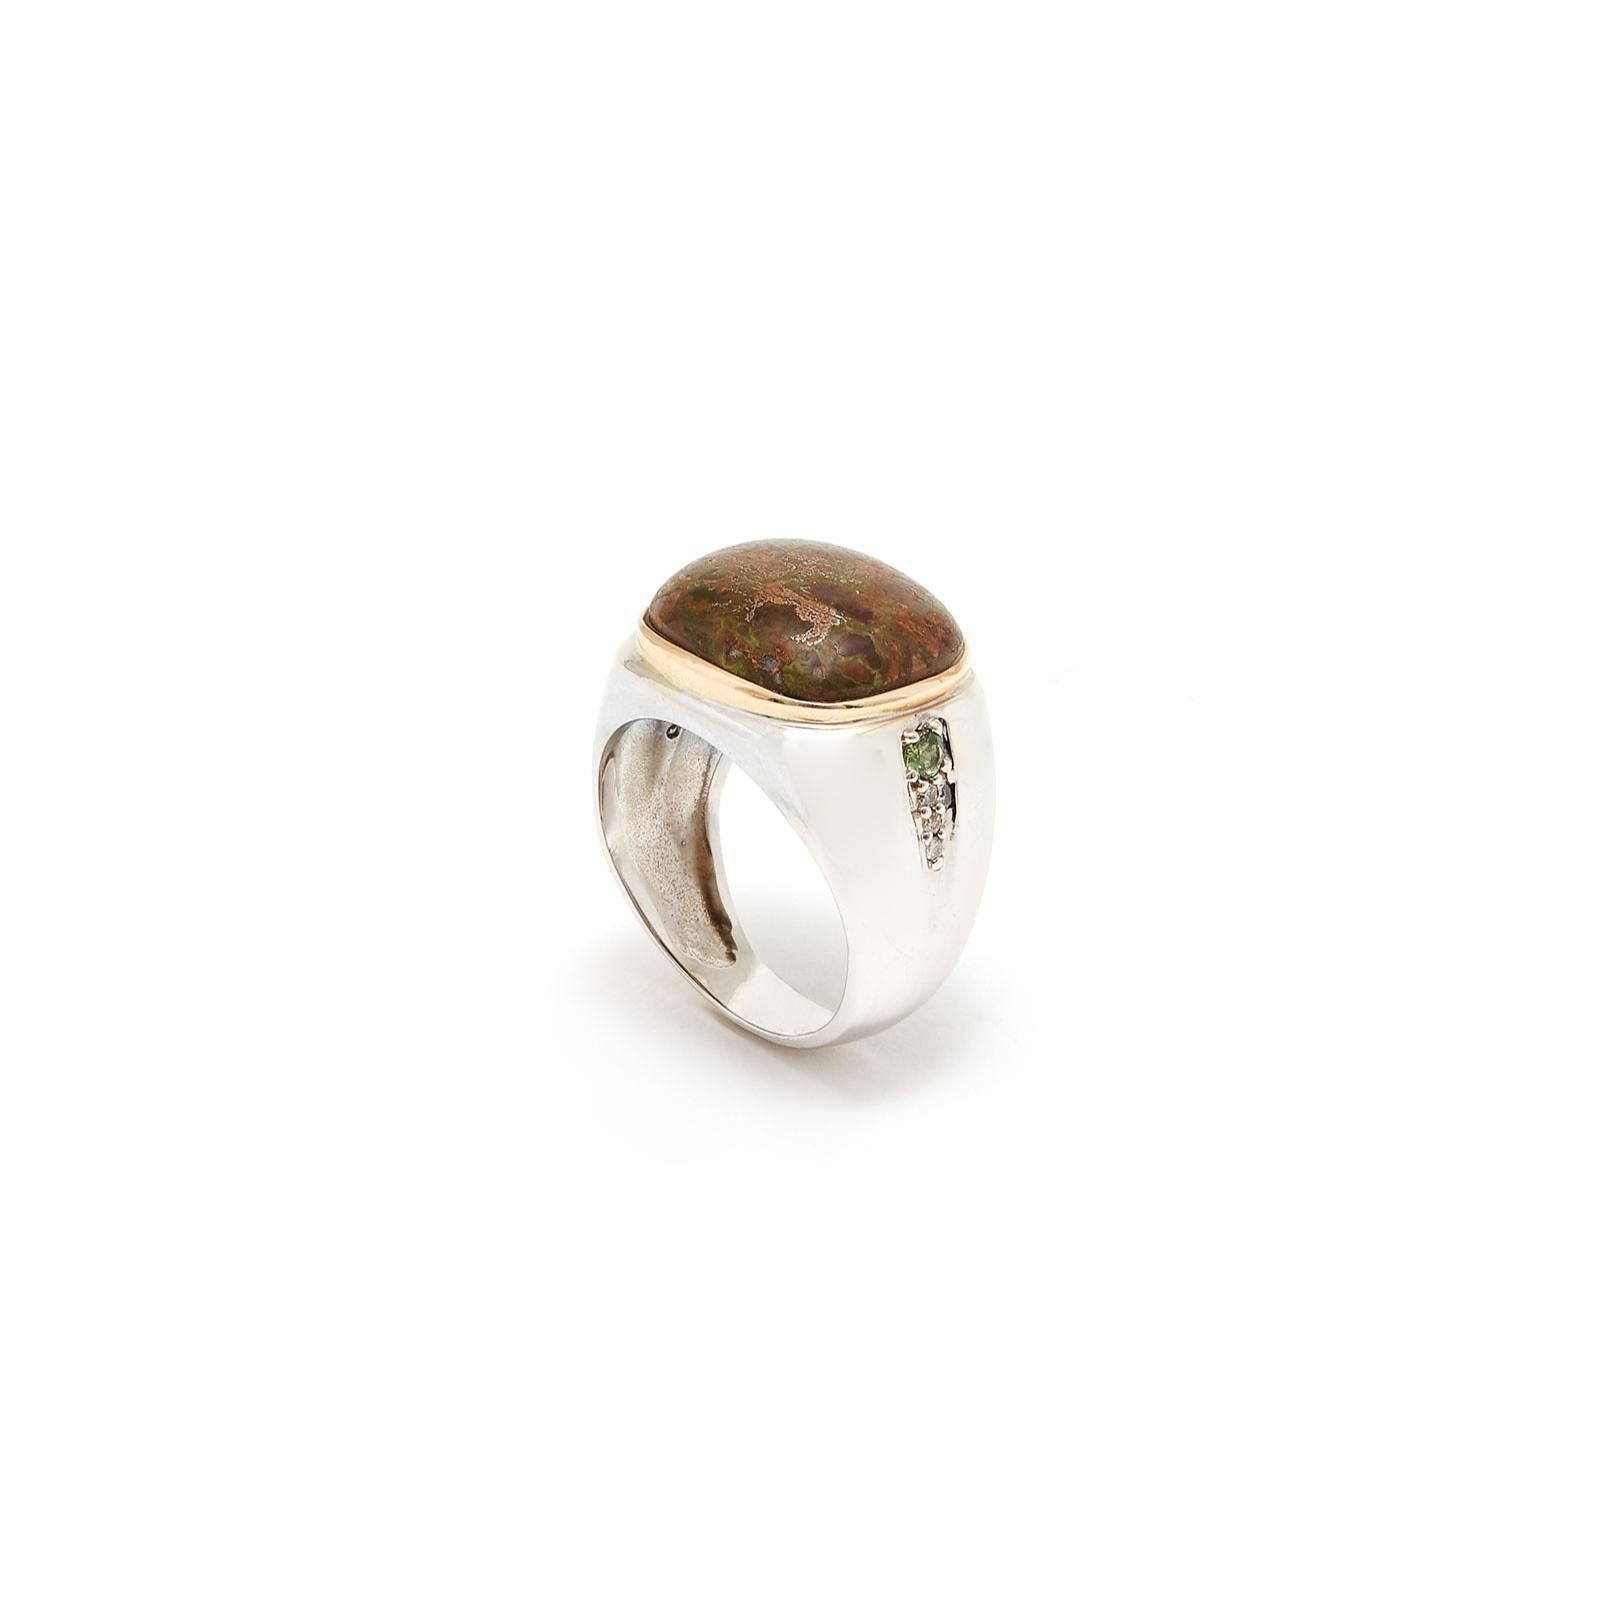 A beautiful moss green and earth brown jasper set in white gold accented with emeralds and diamonds.

  - Size 7.5 ring is resizable
  - Length 22 cm.
  - Width 18 cm.